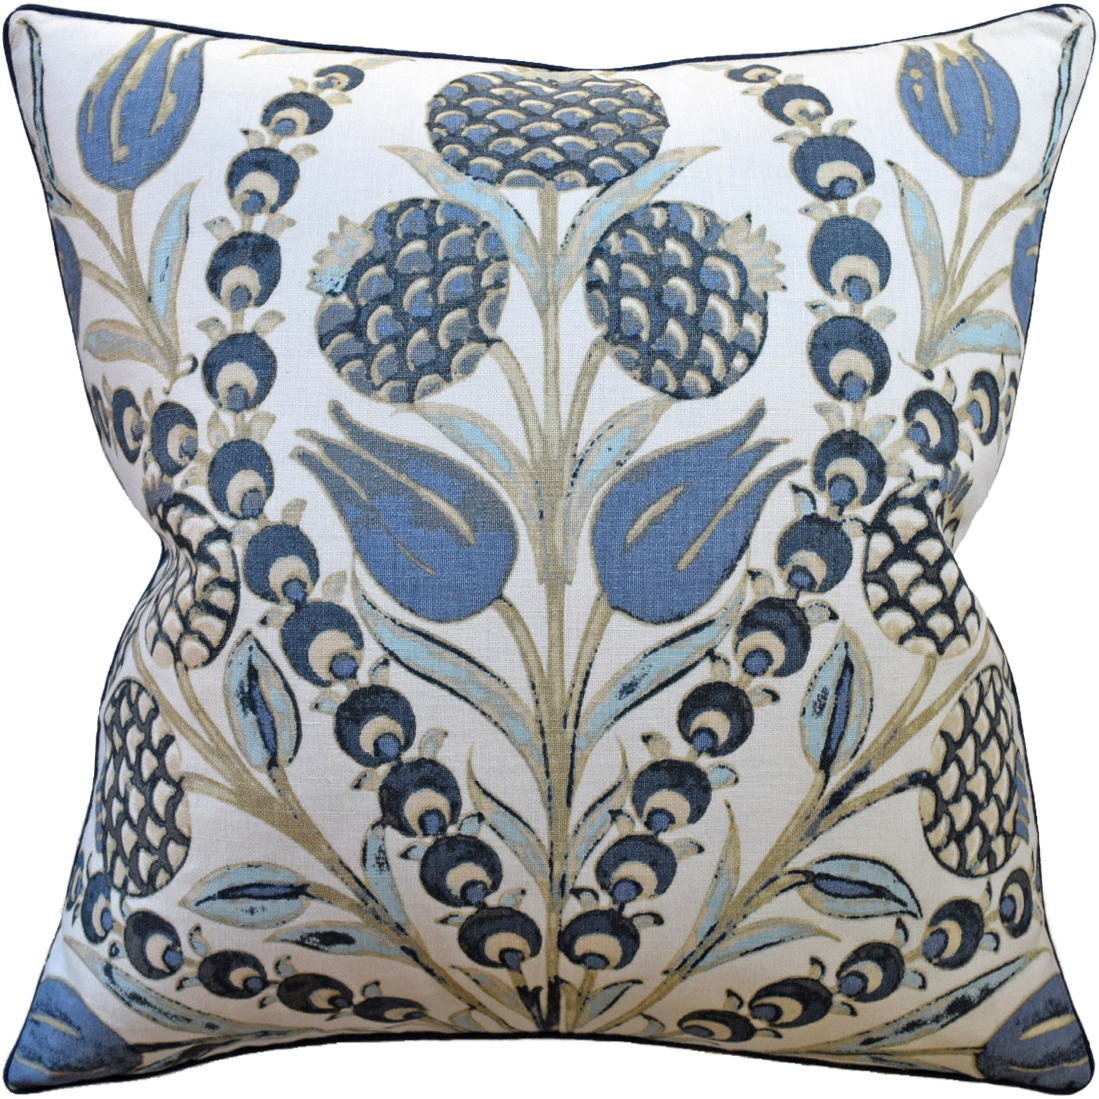 the cornelia pillow, with blue and tan rustic patterns, brings a touch of coastal home decor to the living room.